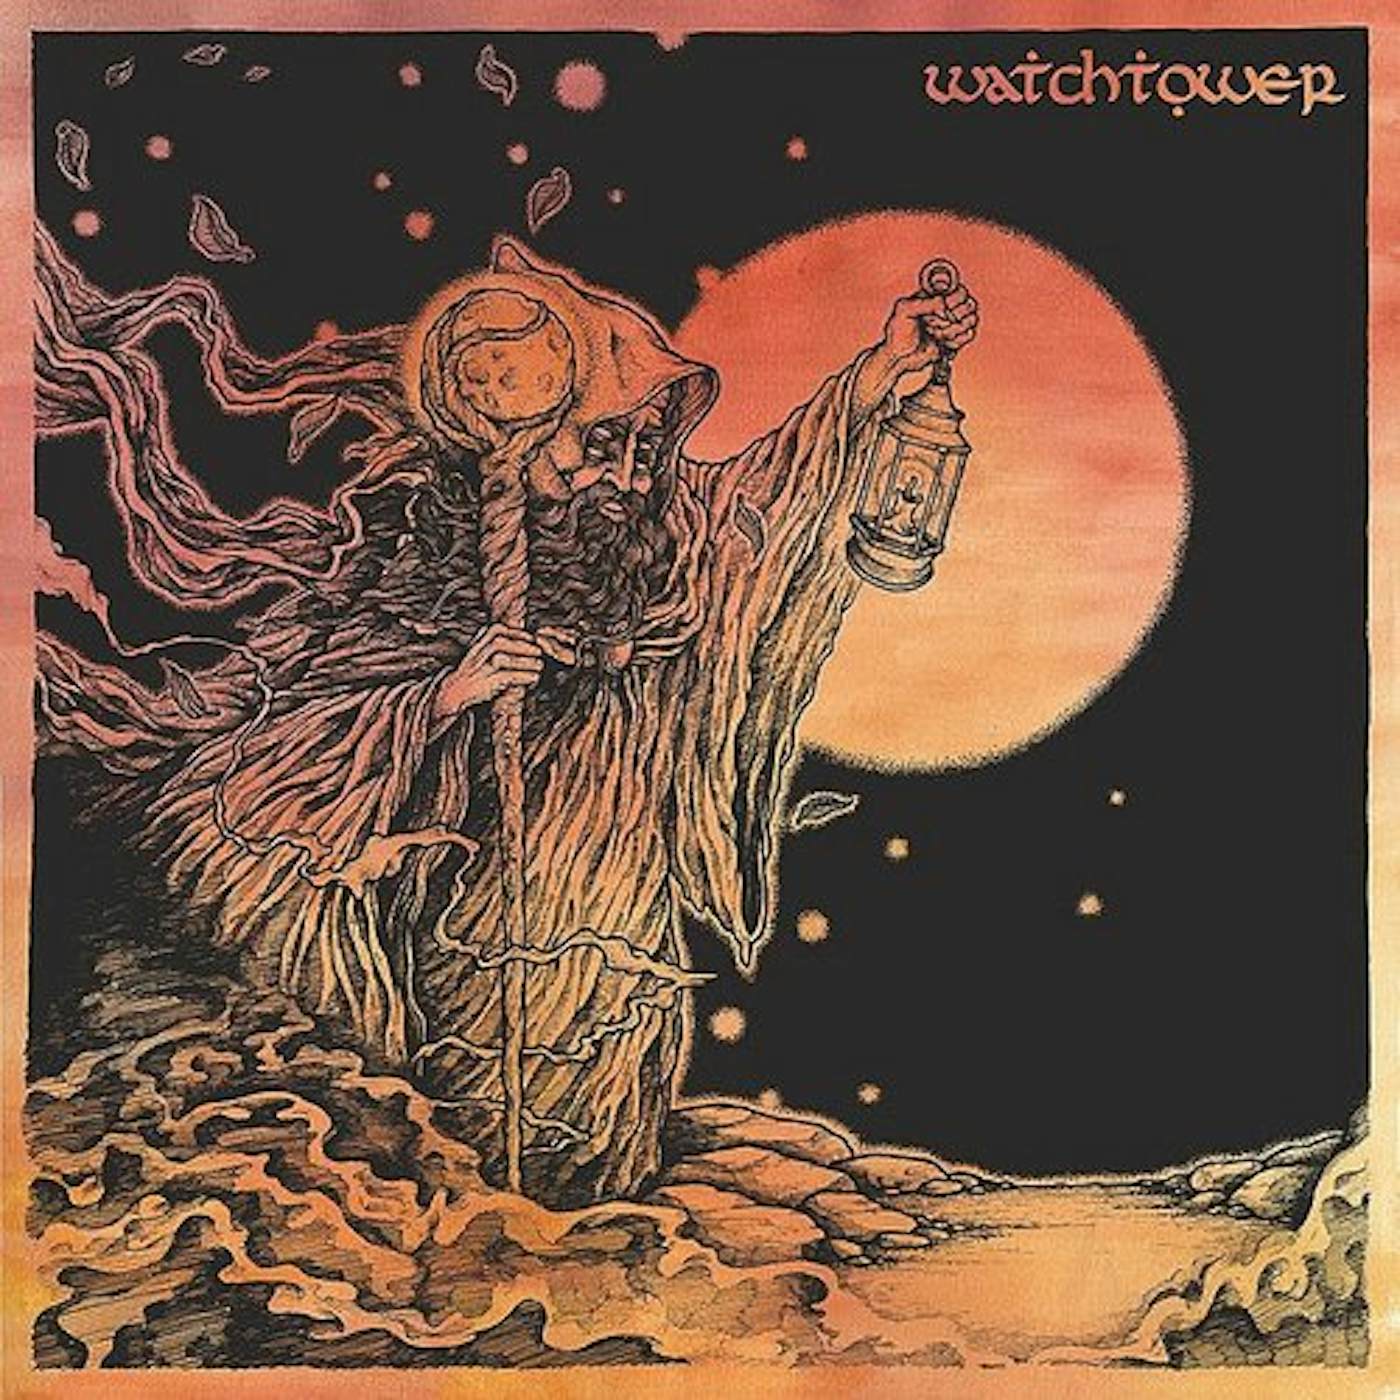 Watchtower RADIANT MOON (WHITE WITH PINK SPLATTER) Vinyl Record